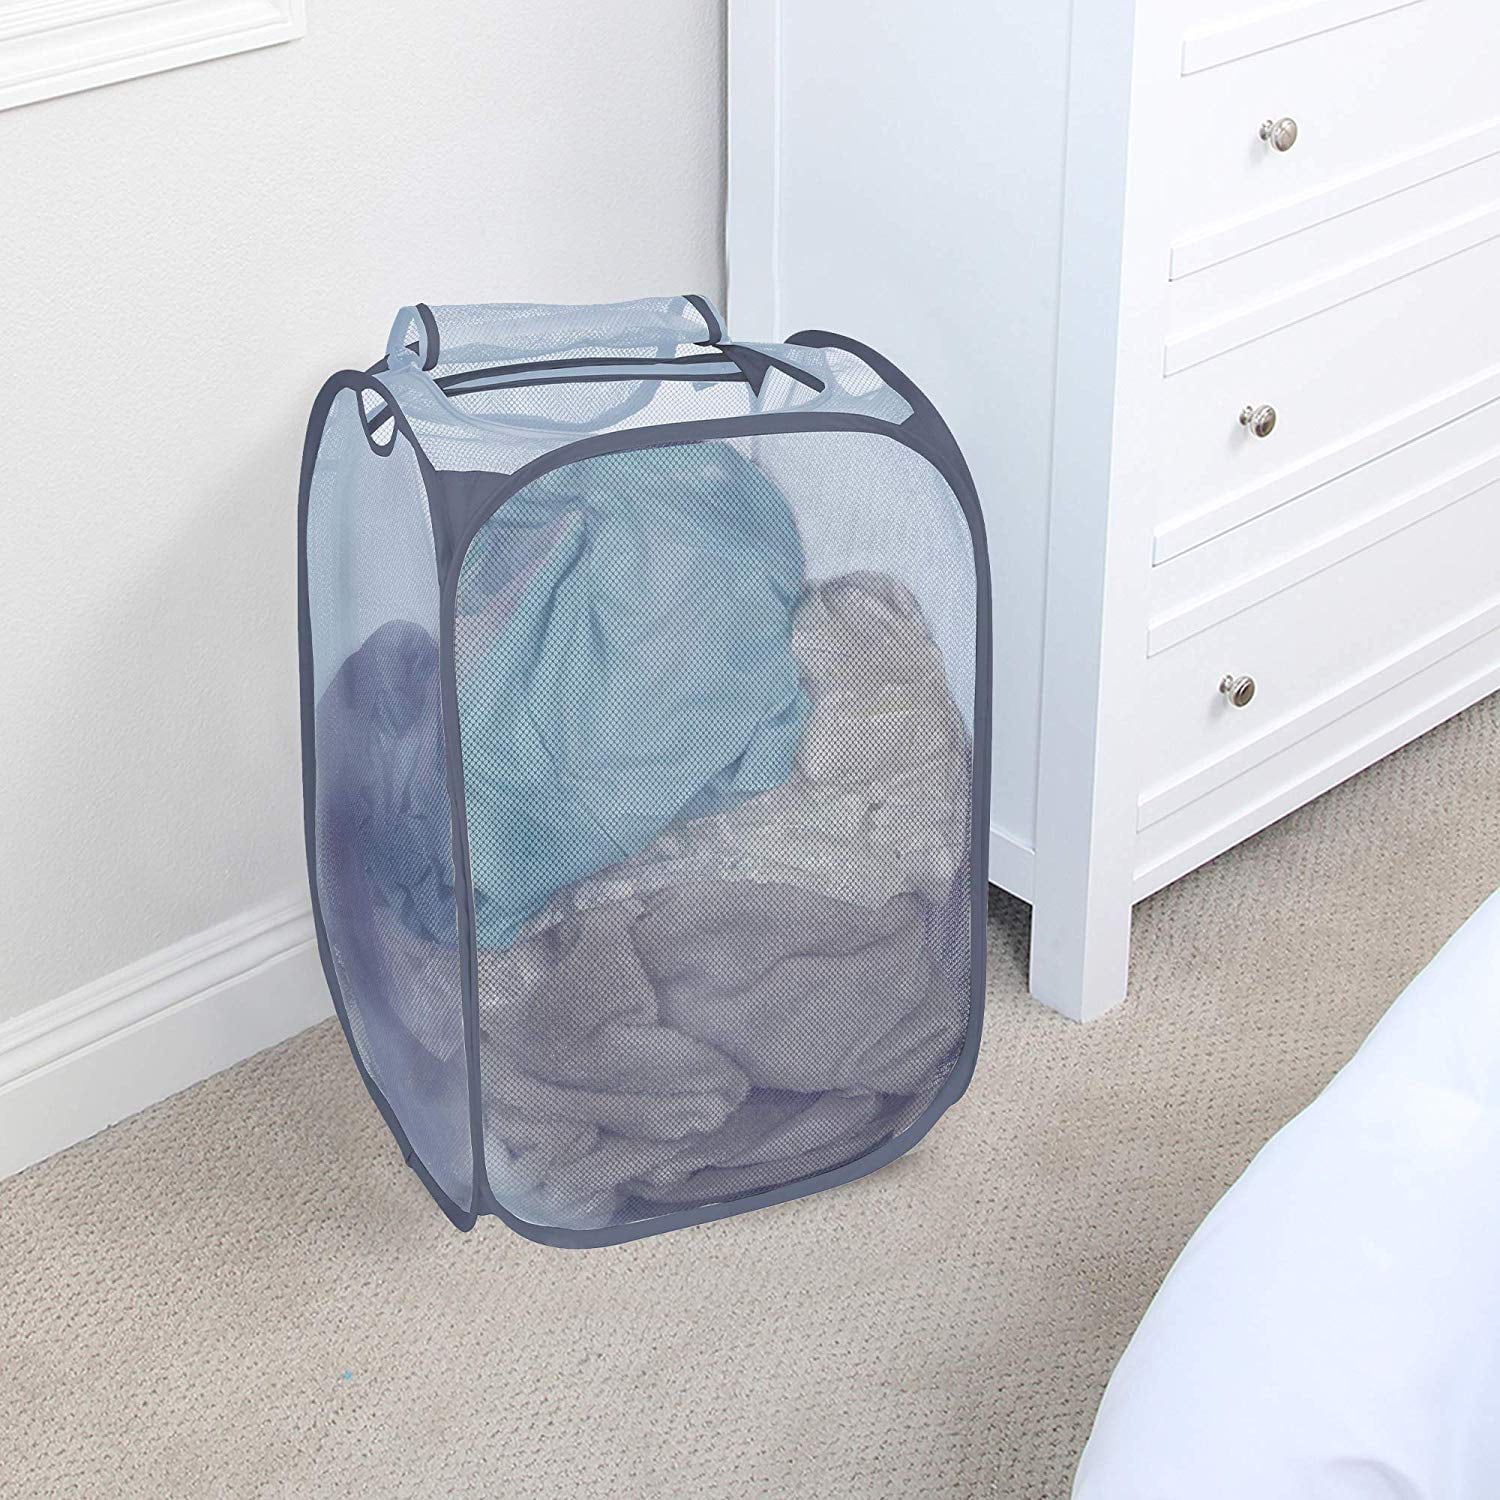 Smart Design Collapsible Pop-Up Laundry Hamper, White, Holds 3